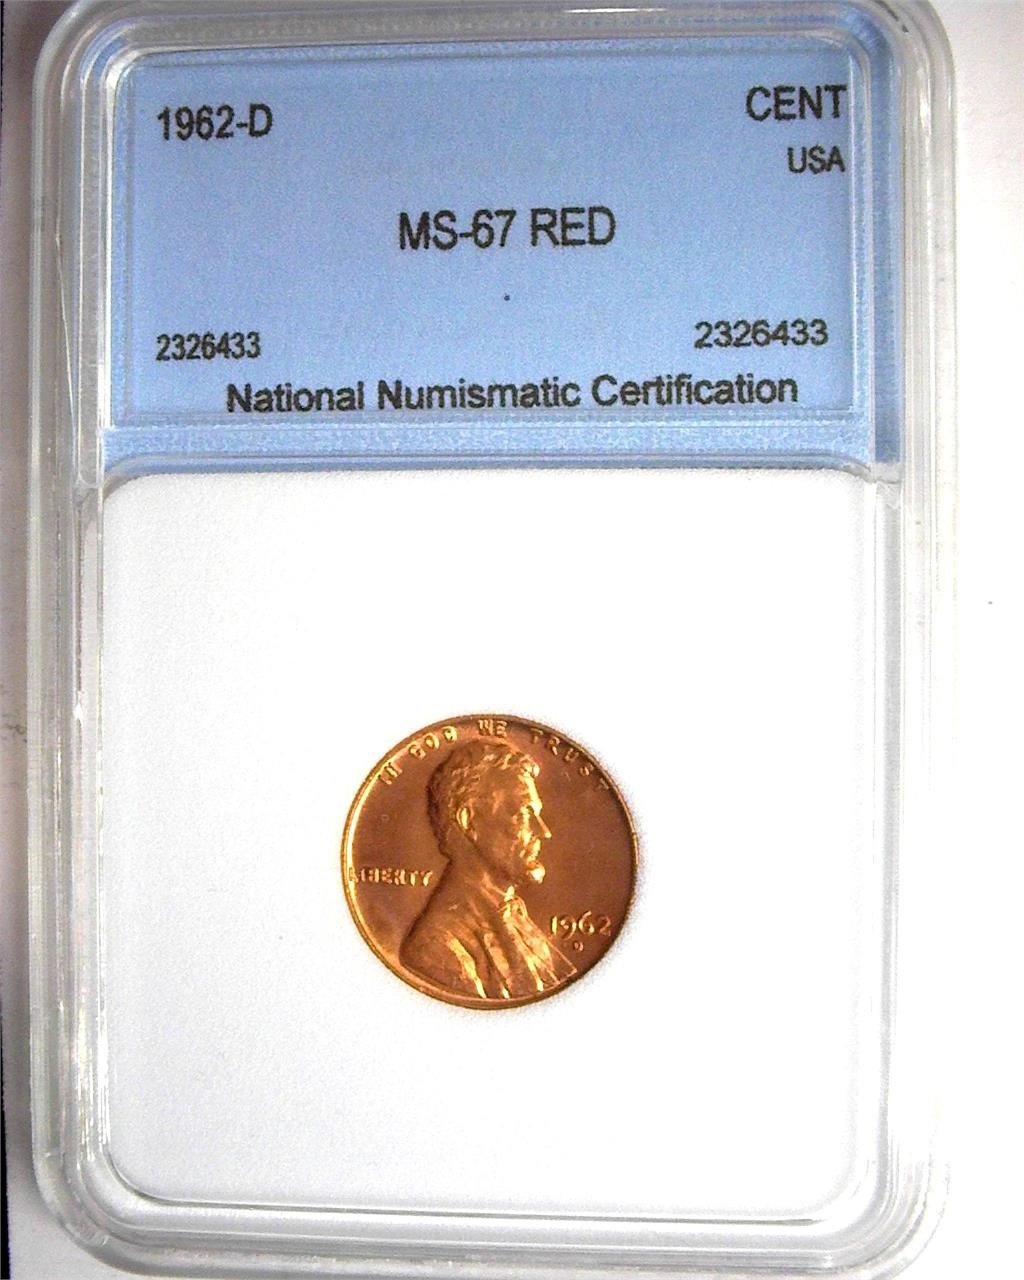 1962-D Cent MS67 RD LISTS FOR $1500